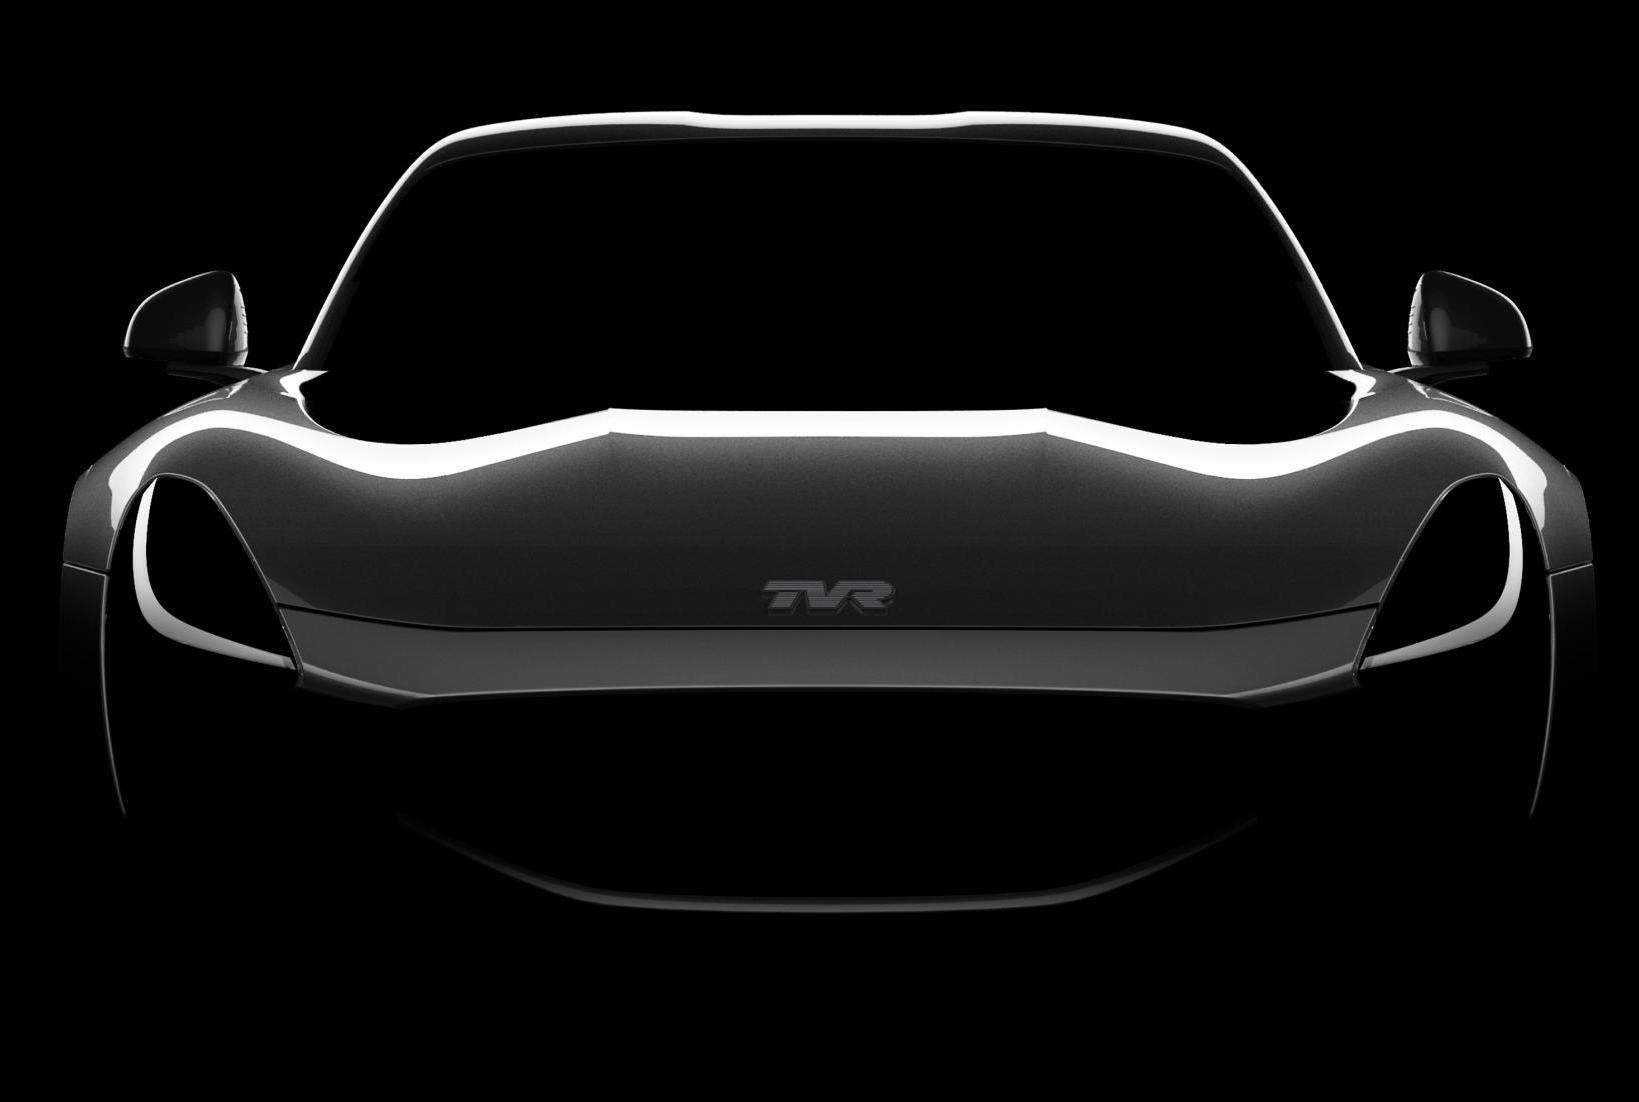 New TVR previewed again, weight & performance details emerge